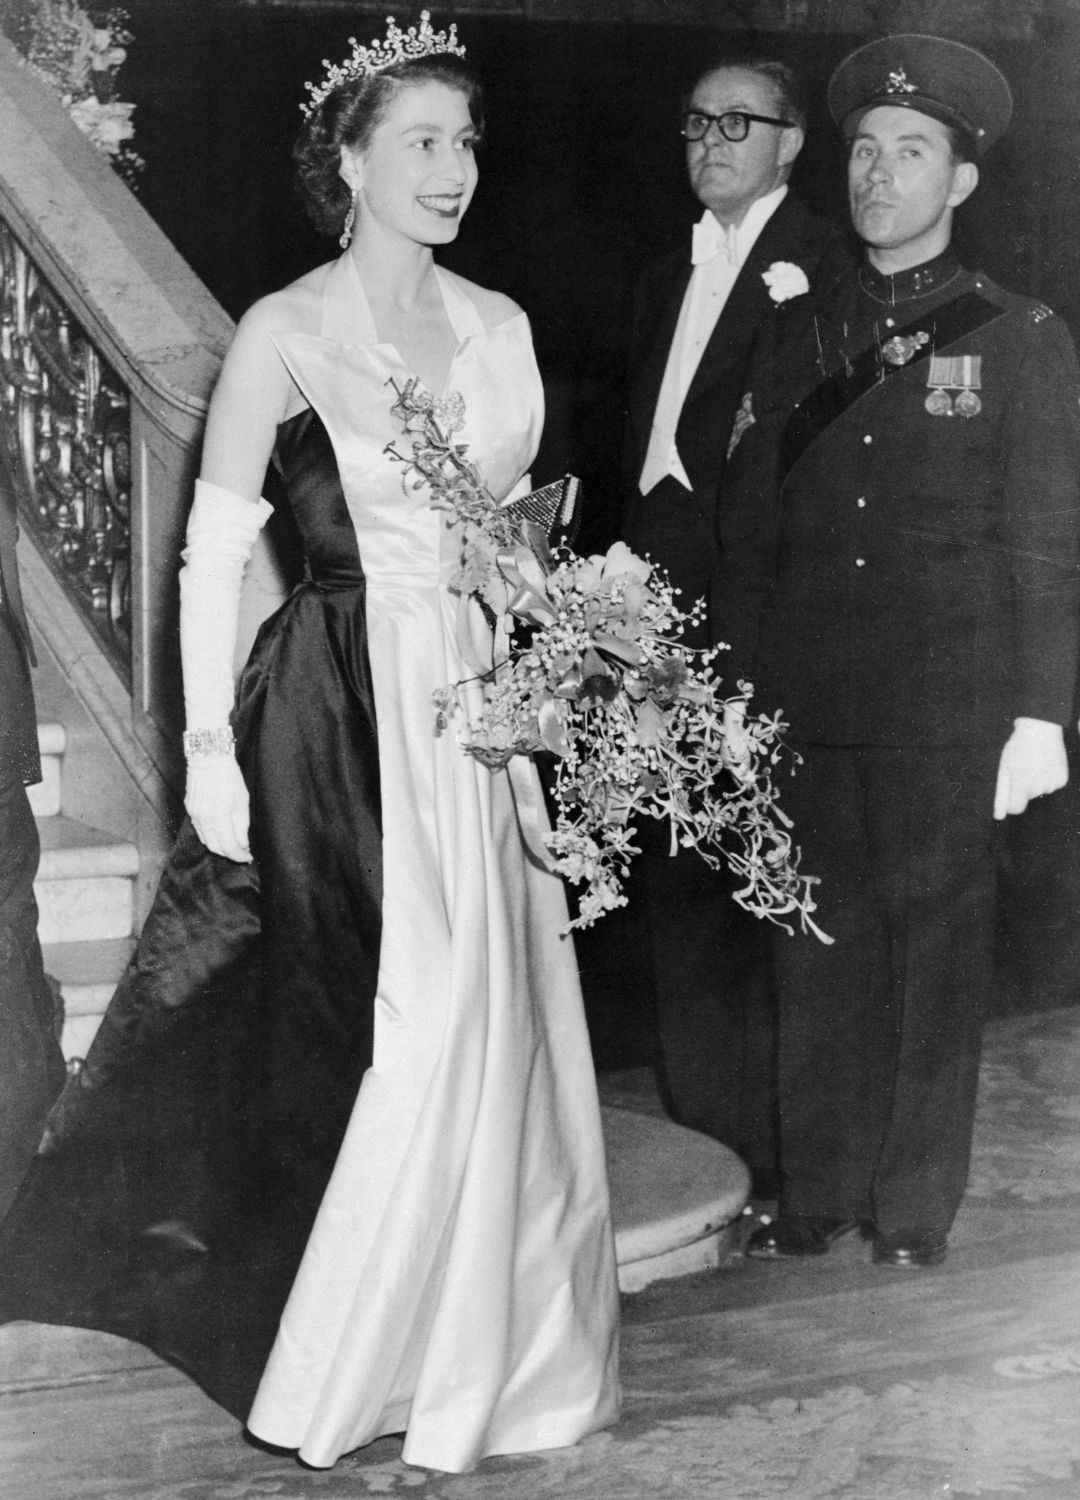 <p>                     This might be perhaps the grandest exit of the theatre we've ever seen. Pictured here leaving the Empire Theatre in Leicester Square after attending the Royal Film Show in 1952, Queen Elizabeth looks an absolute vision in her black and white satin gown. The regal ensemble was of course topped off with 'Granny's tiara', some elongated diamond earrings and a matching bracelet.                   </p>